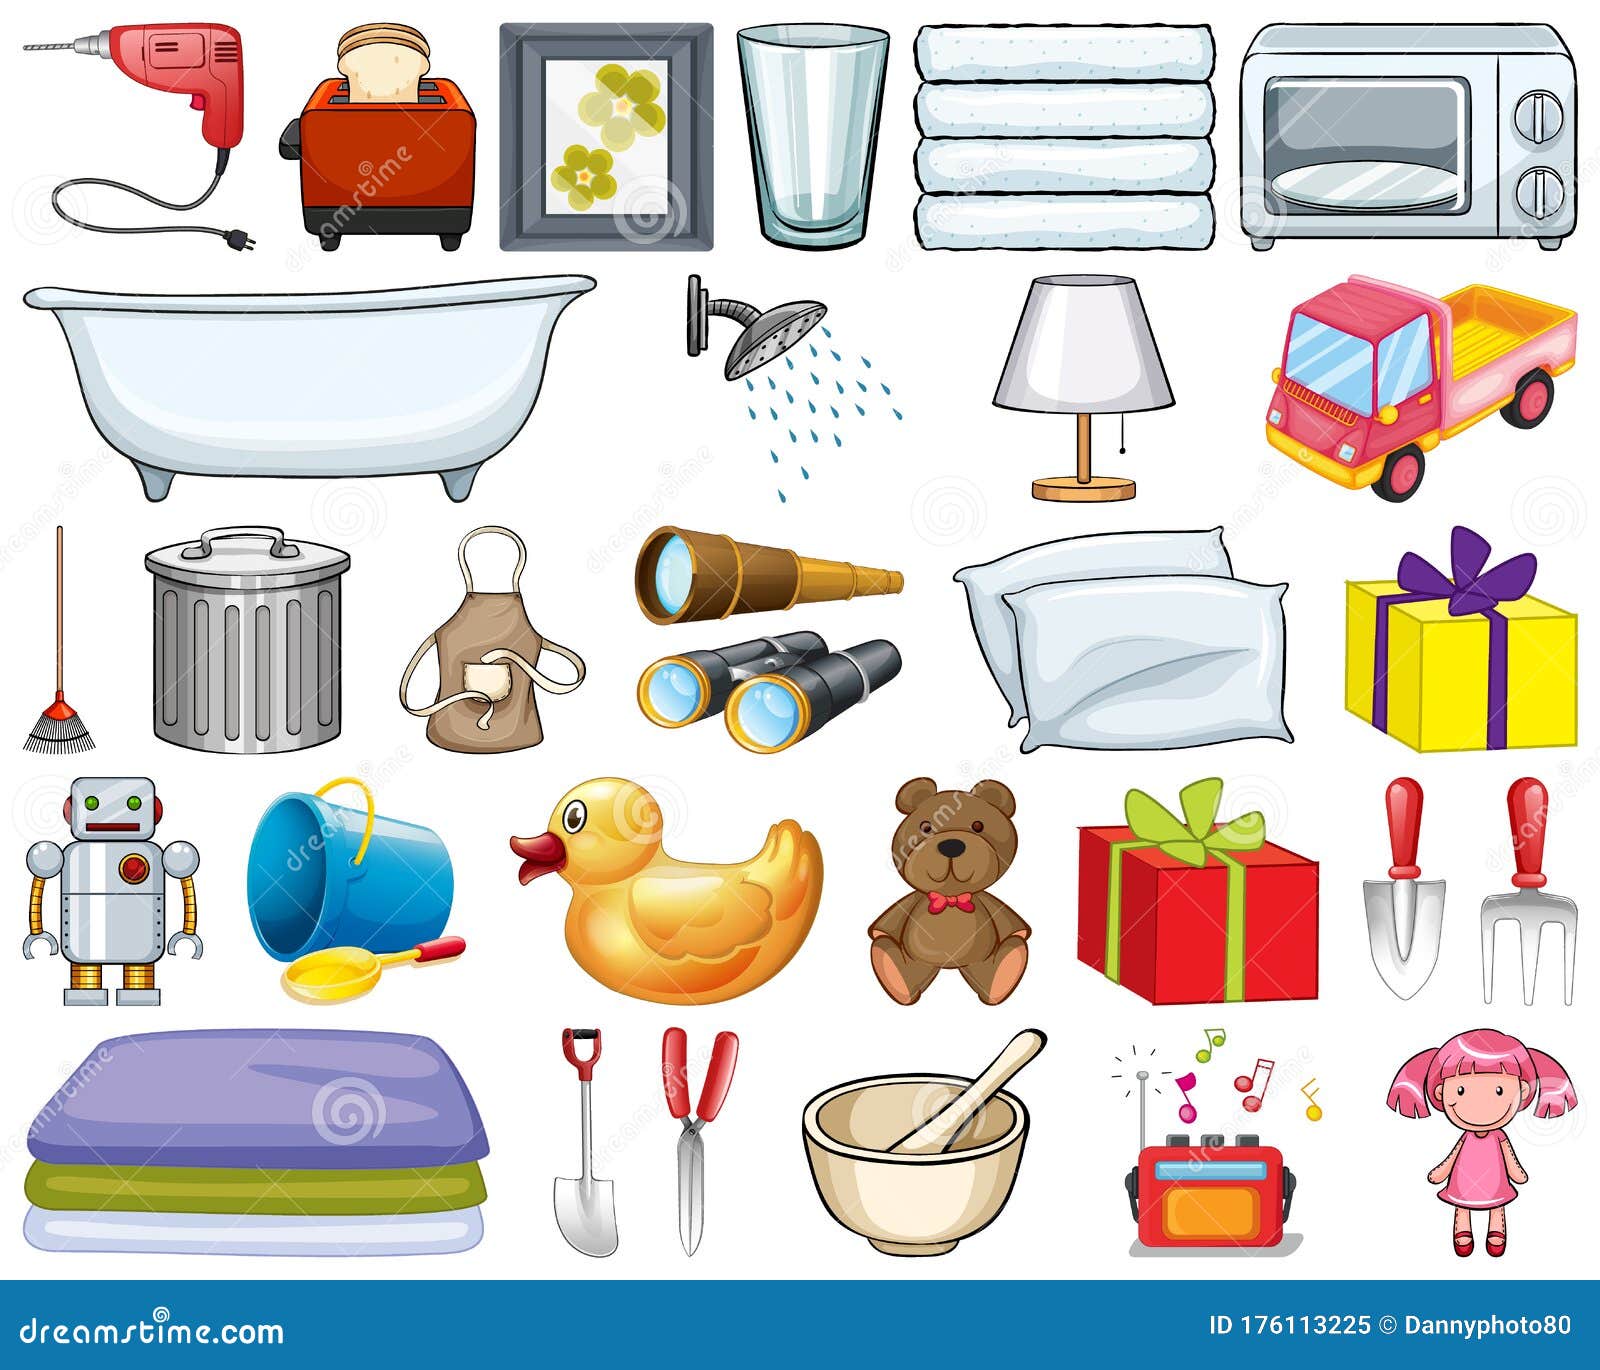 Large Set of Household Items and Many Toys on White Background